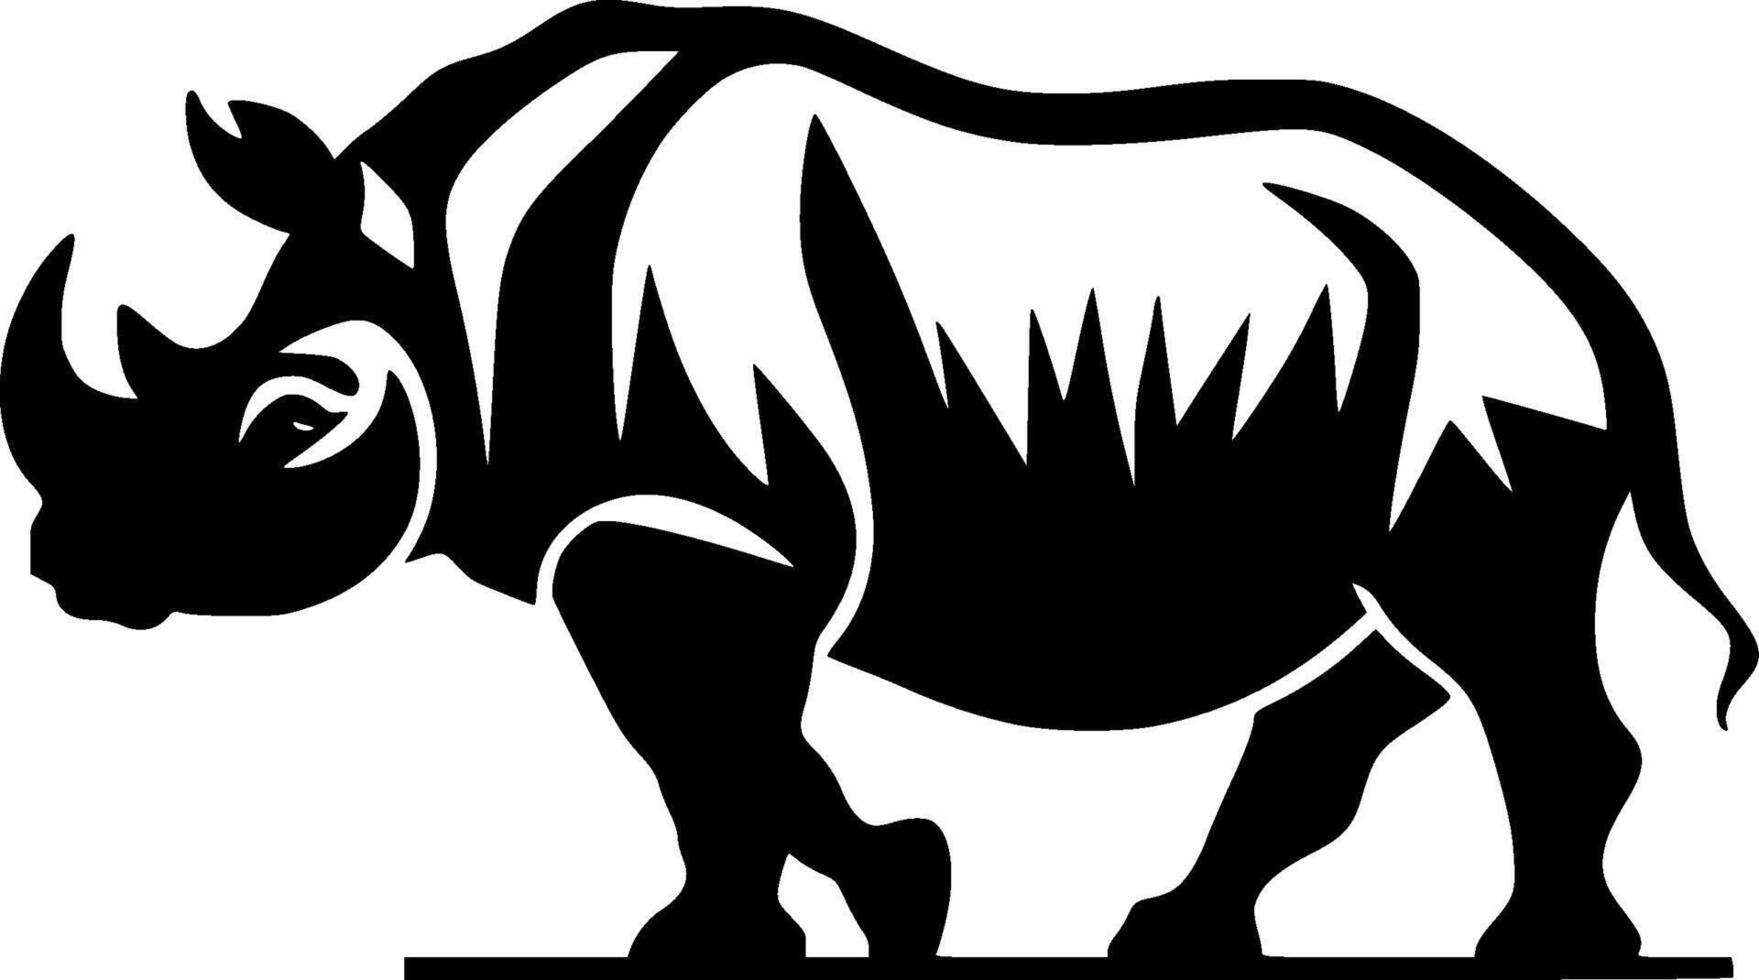 Rhinoceros - High Quality Vector Logo - Vector illustration ideal for T-shirt graphic